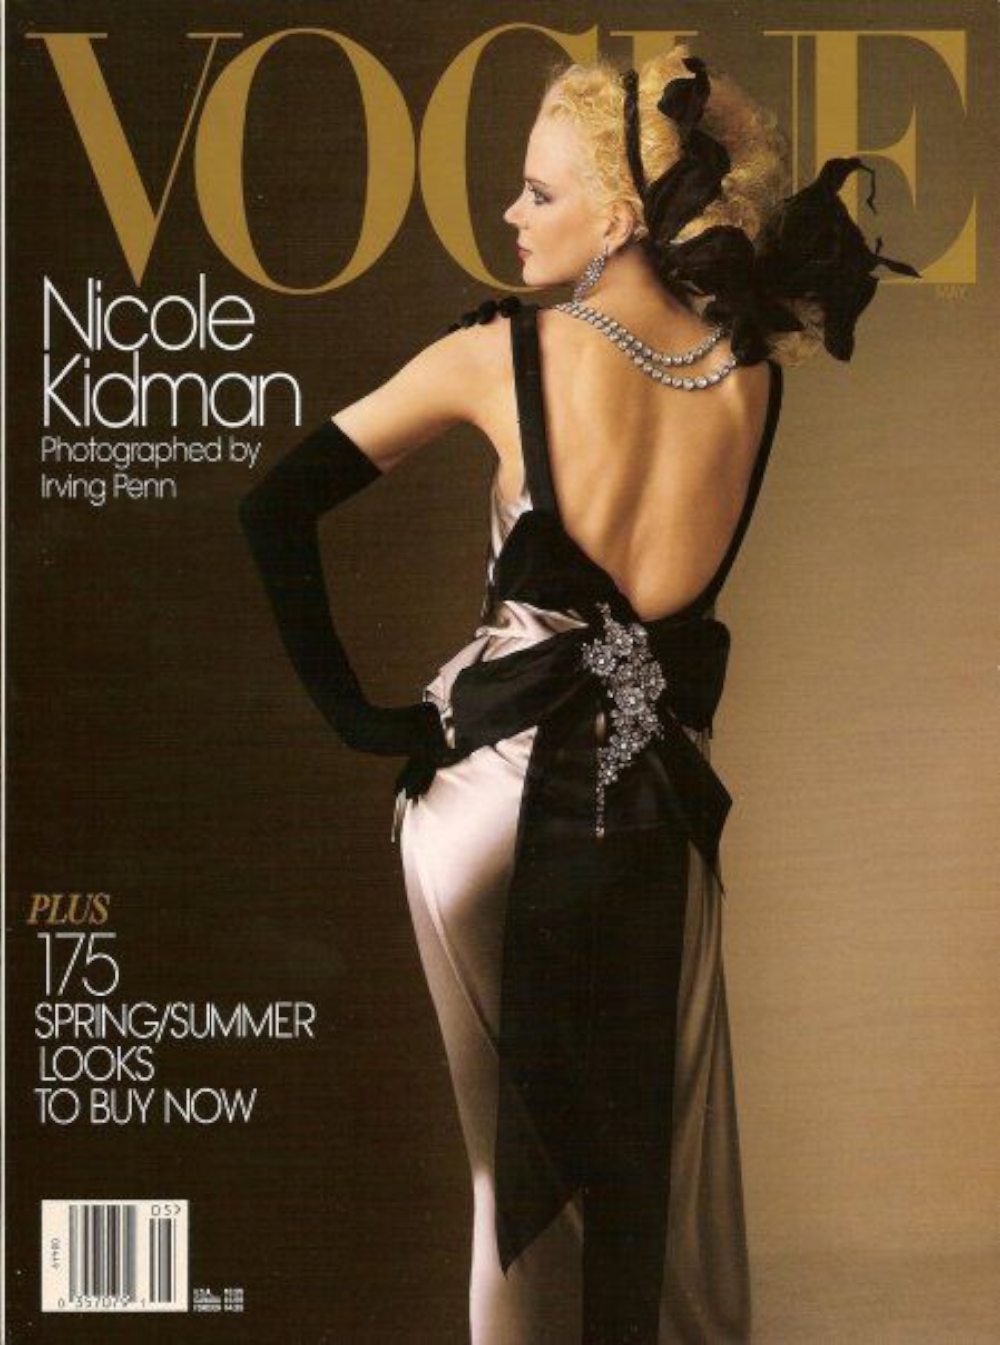 Cover of Vogue (May 2004): Nicole Kidman wearing long gloves by Daniel Storto.